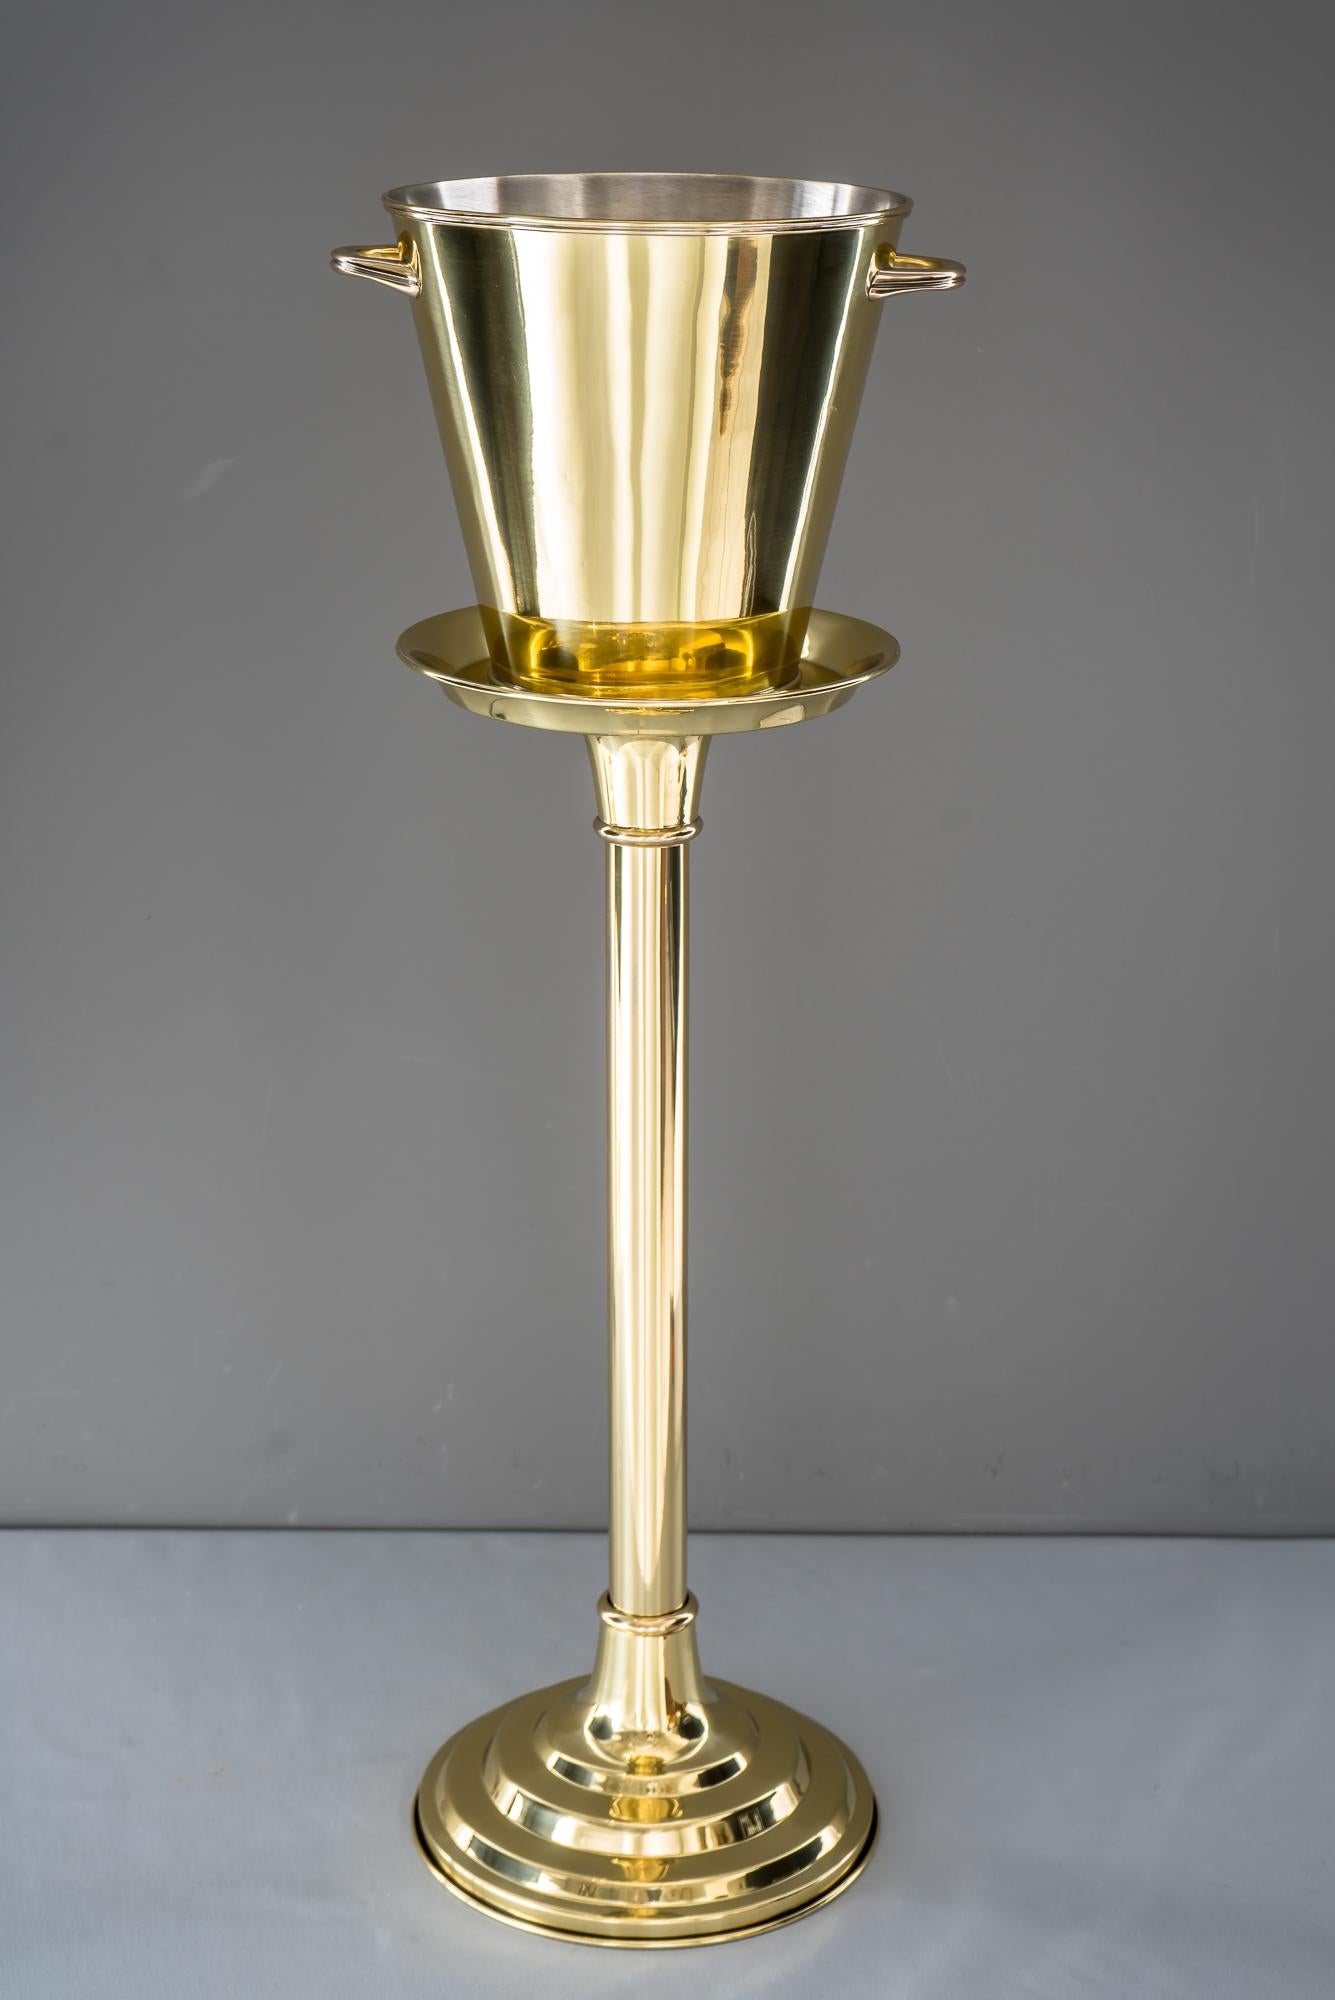 Art Deco ice bucket on stand vienna circa 1920s
Polished and stove enamelled
The ice bucket is silvered inside
The hight of the stand is 60cm. With the bucket it is the high: 79cm
The diameterof the stand is: 23cm
Wide of the bucket:
Measures: